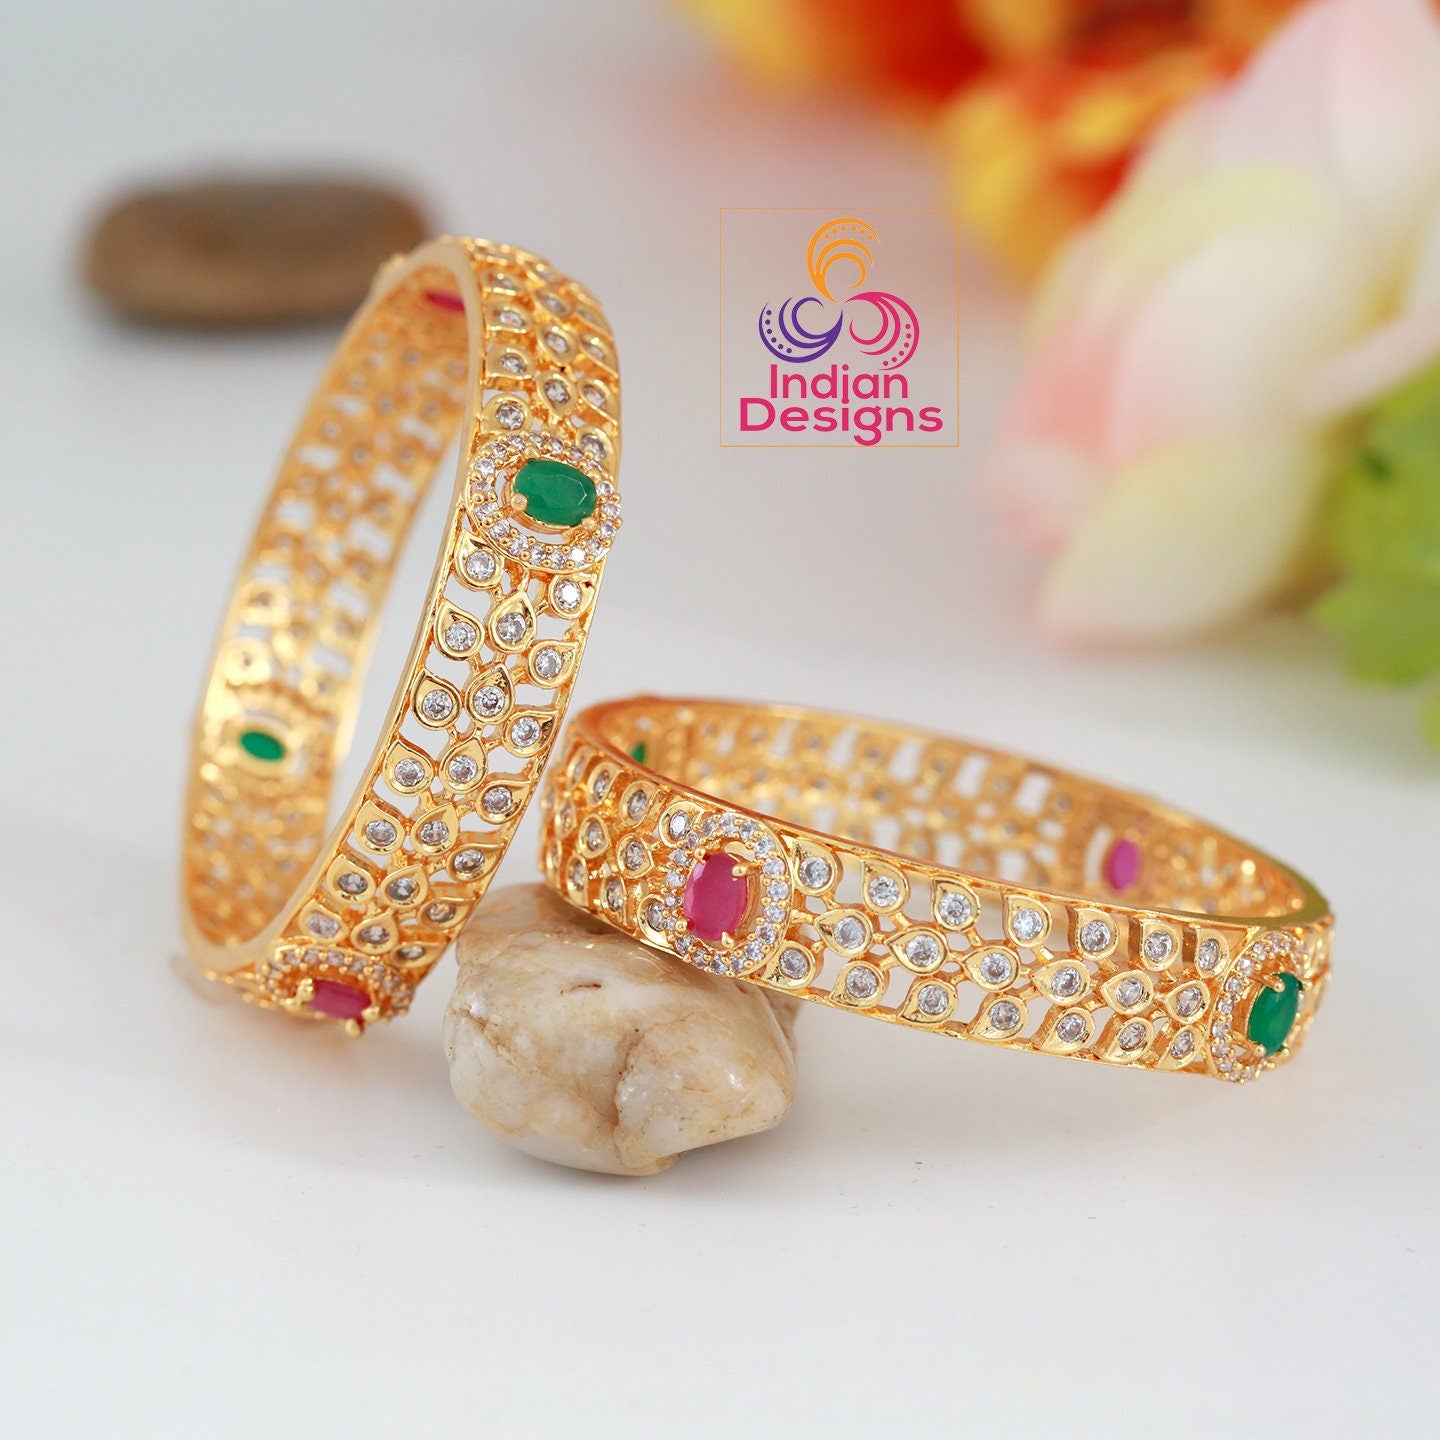 Pair of Gold Kada Bangle Designs With Stones |Ruby Emerald diamond bangles bracelets | Perfect for everyday wear |South Indian Style bangles